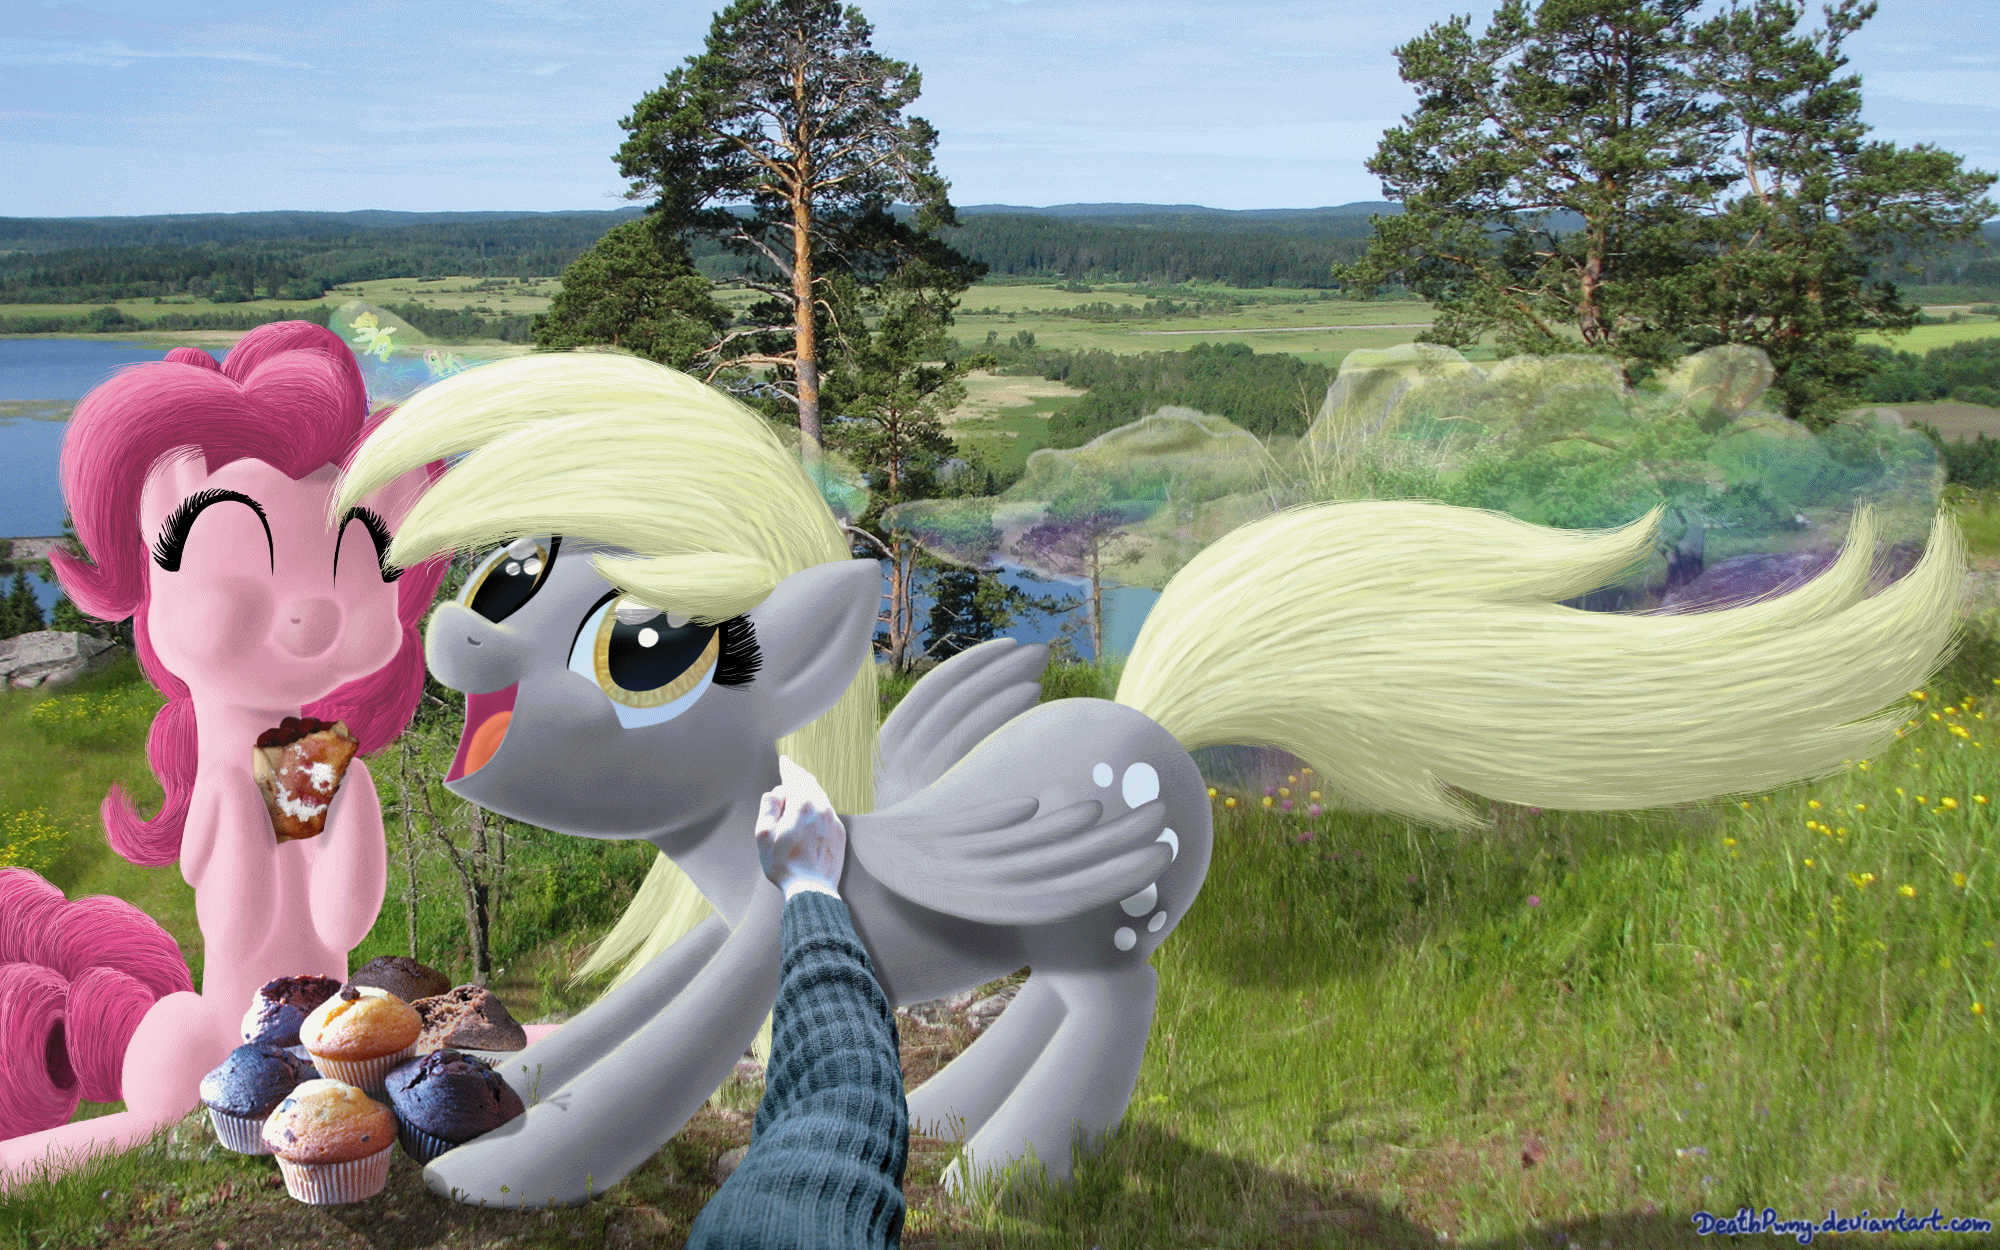 http://fc08.deviantart.net/fs71/f/2012/051/5/d/we_wuf_our_derpy__animated__by_deathpwny-d4qdp0s.gif